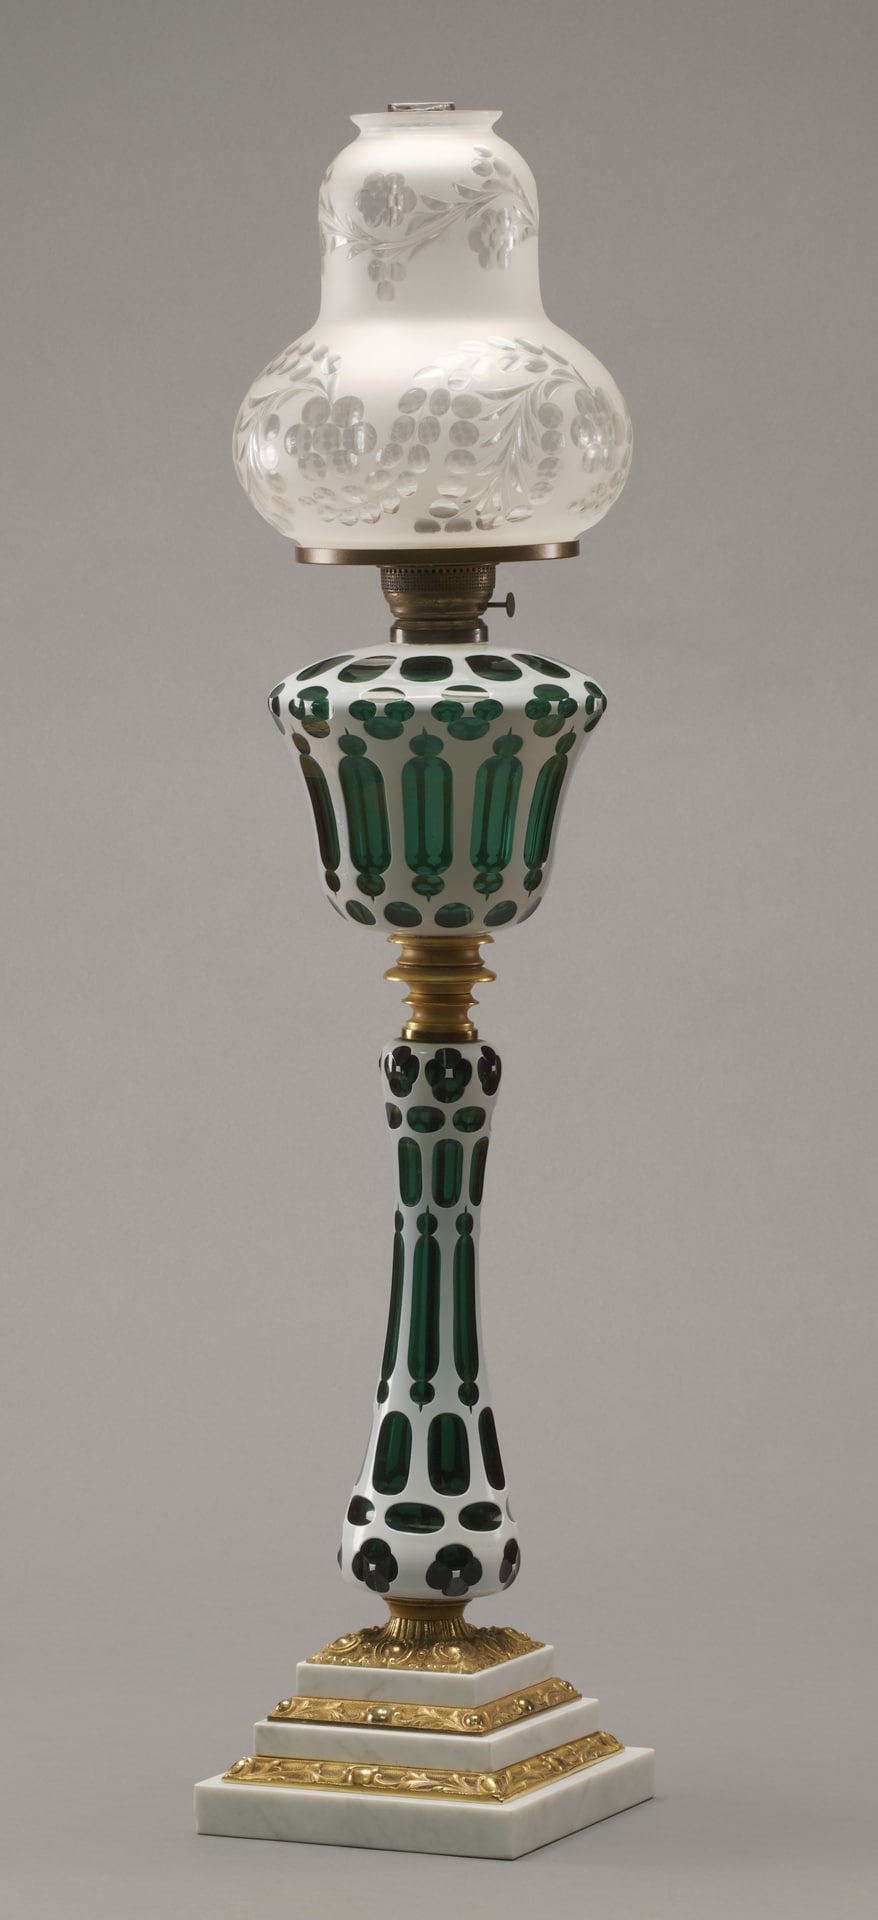 a tall glass lamp with a gold-stepped base and green glass decoration on the stem